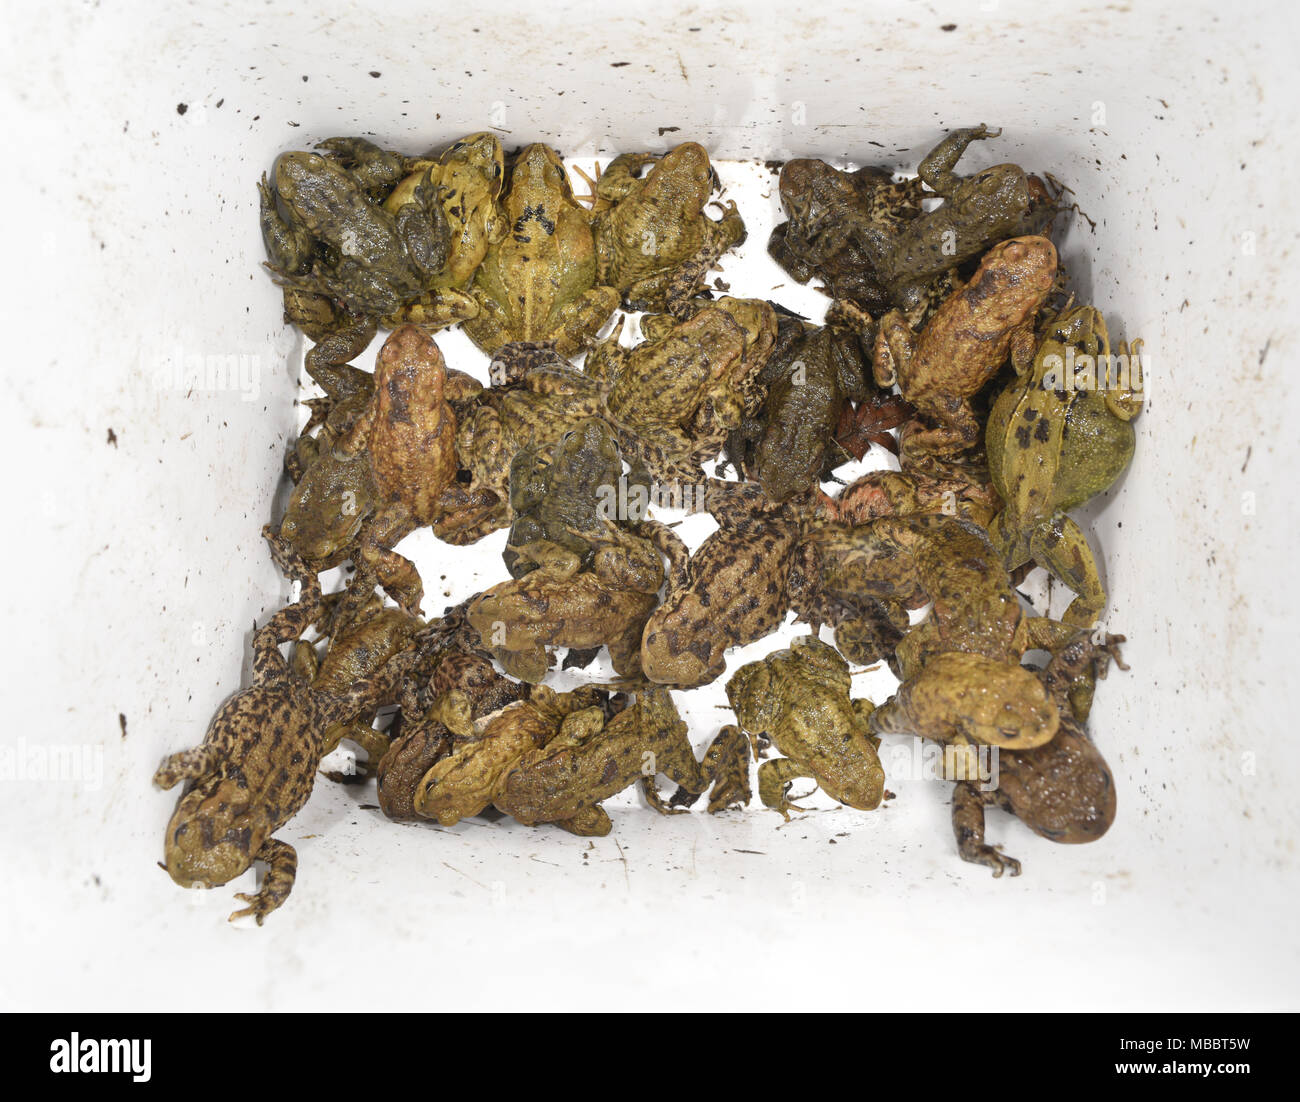 Rescued toads and frogs collected by volunteers at one of Britain's many toad patrols undertaken at known crossing sites in early spring. Stock Photo